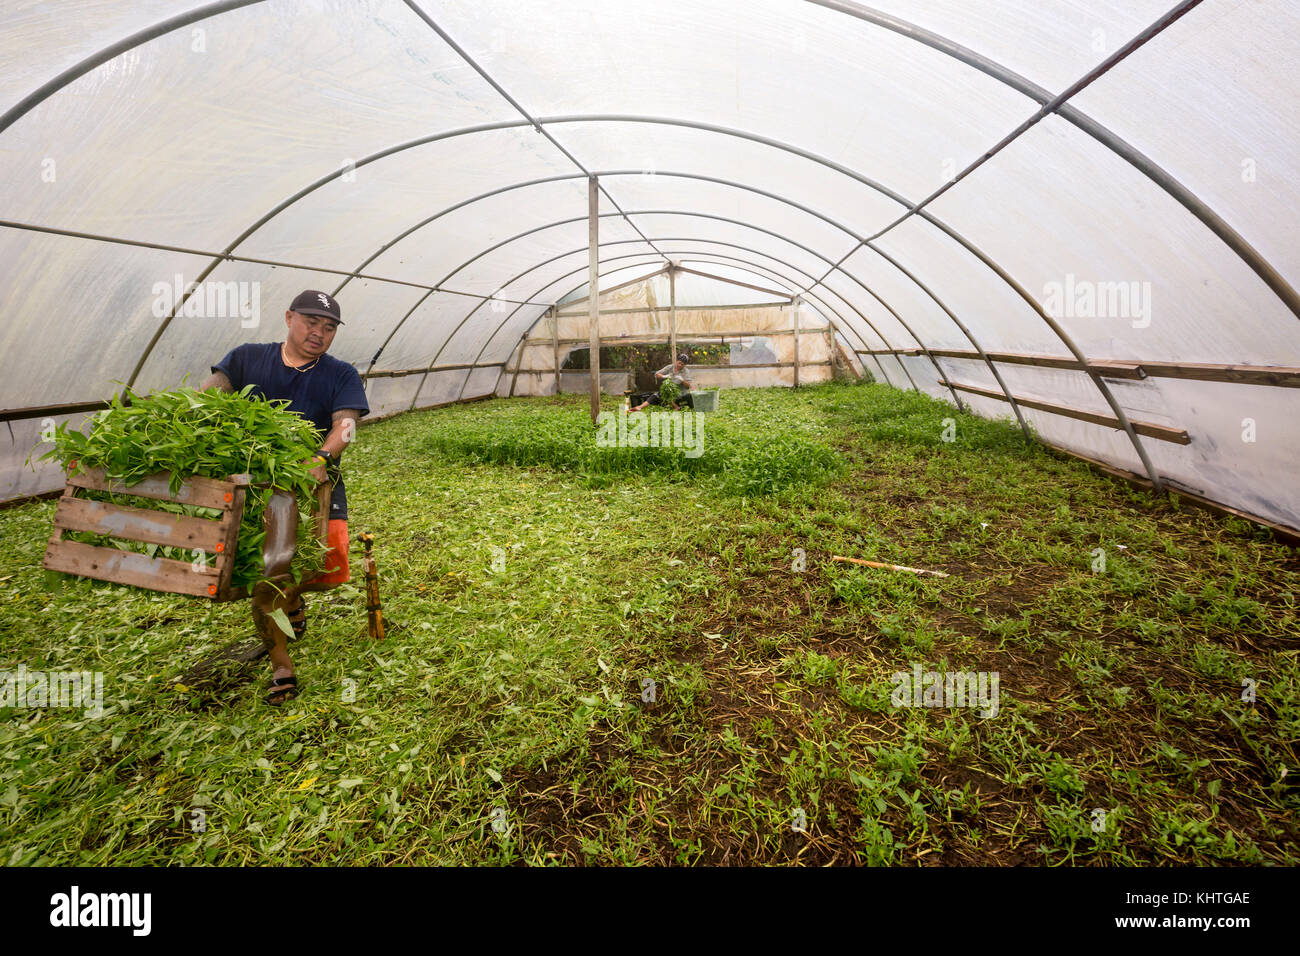 Rosharon, Texas - Cambodian immigrant Sompong Ly, 48, grows water spinach in south Texas greenhouses. He is part of a community of Cambodian refugees  Stock Photo